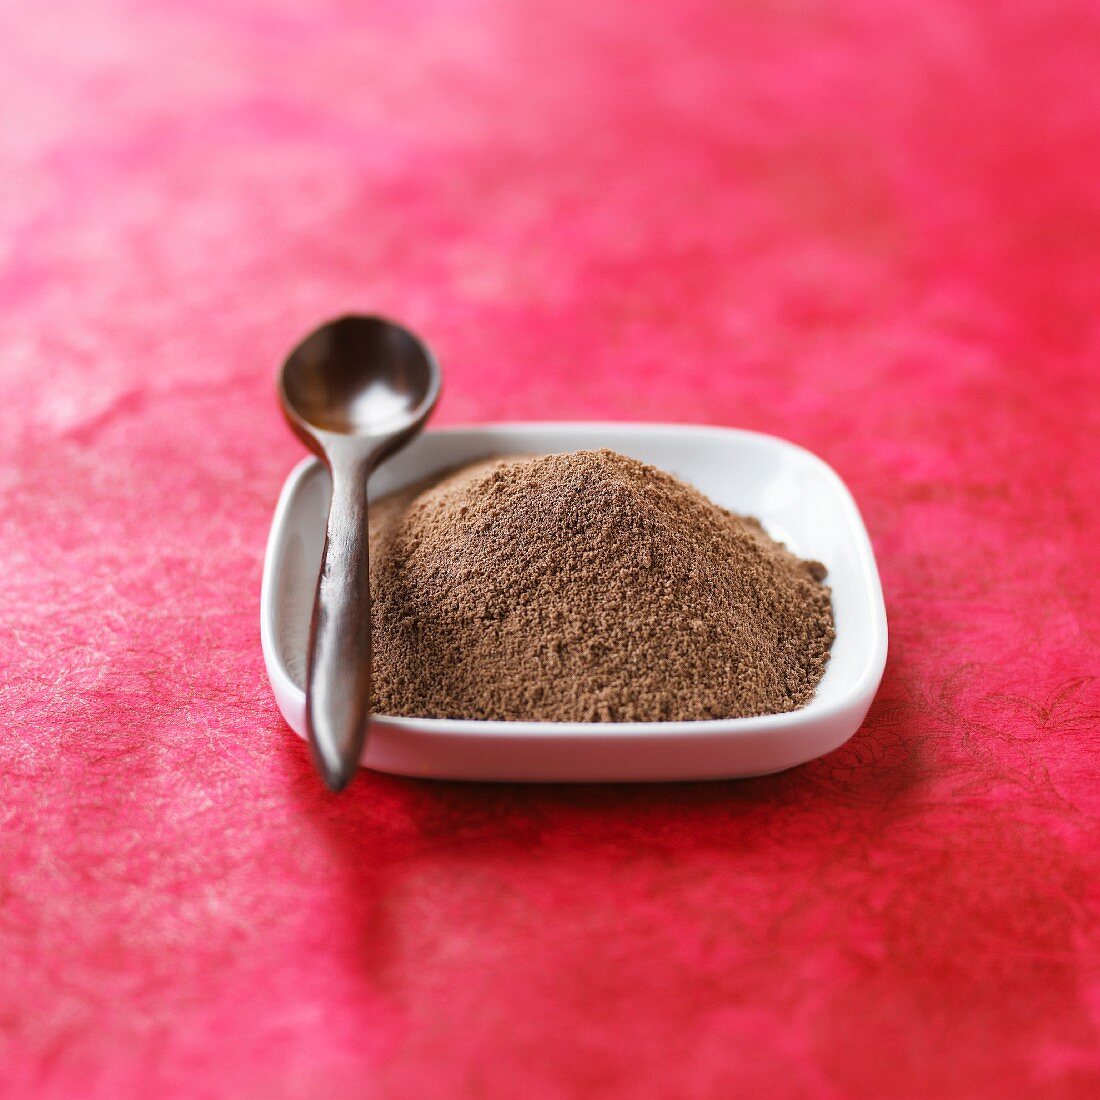 Chocolate powder in a dish with a spoon